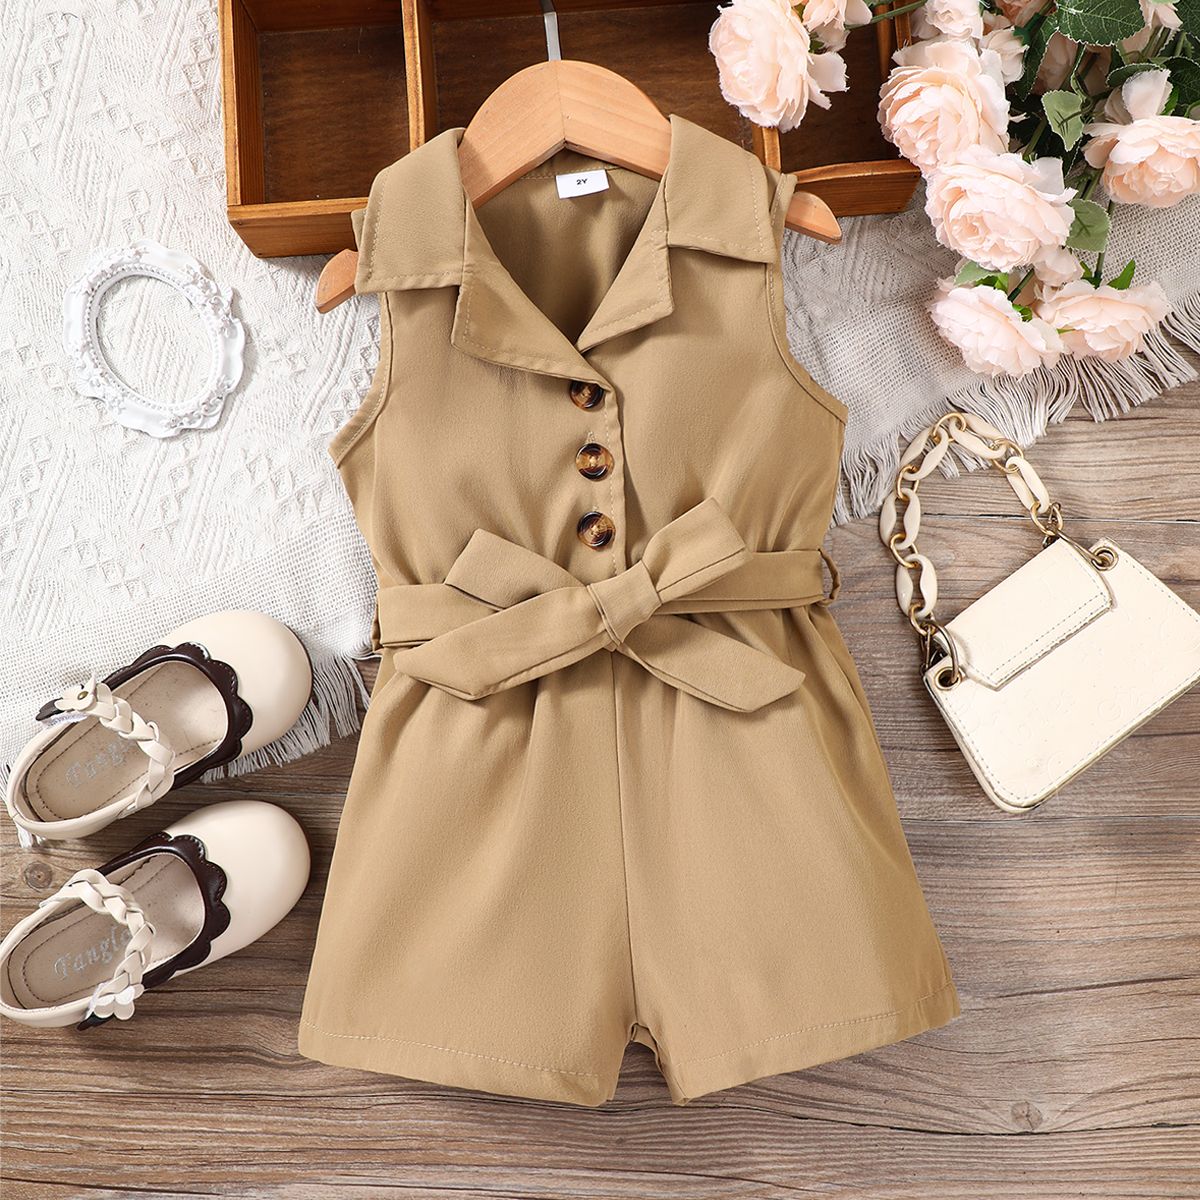 Toddler Girl Preppy style Solid Belted Shirt Romper